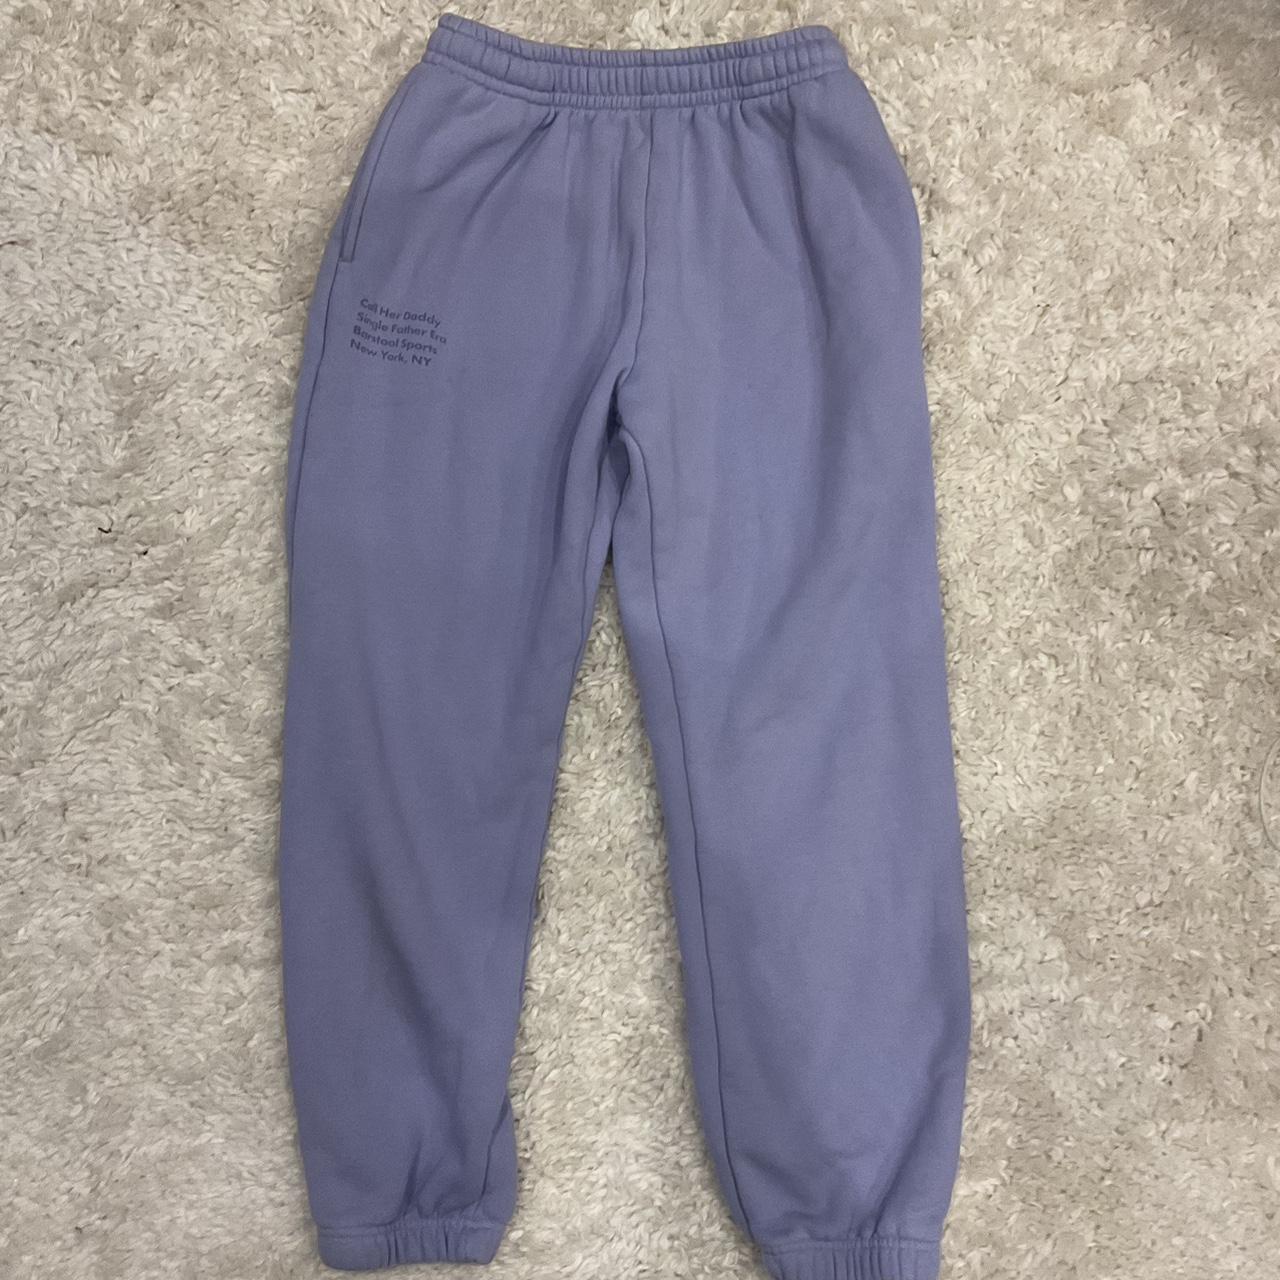 Barstool Sports “Call Her Daddy Single Father Era” Sweatpants - Size Small